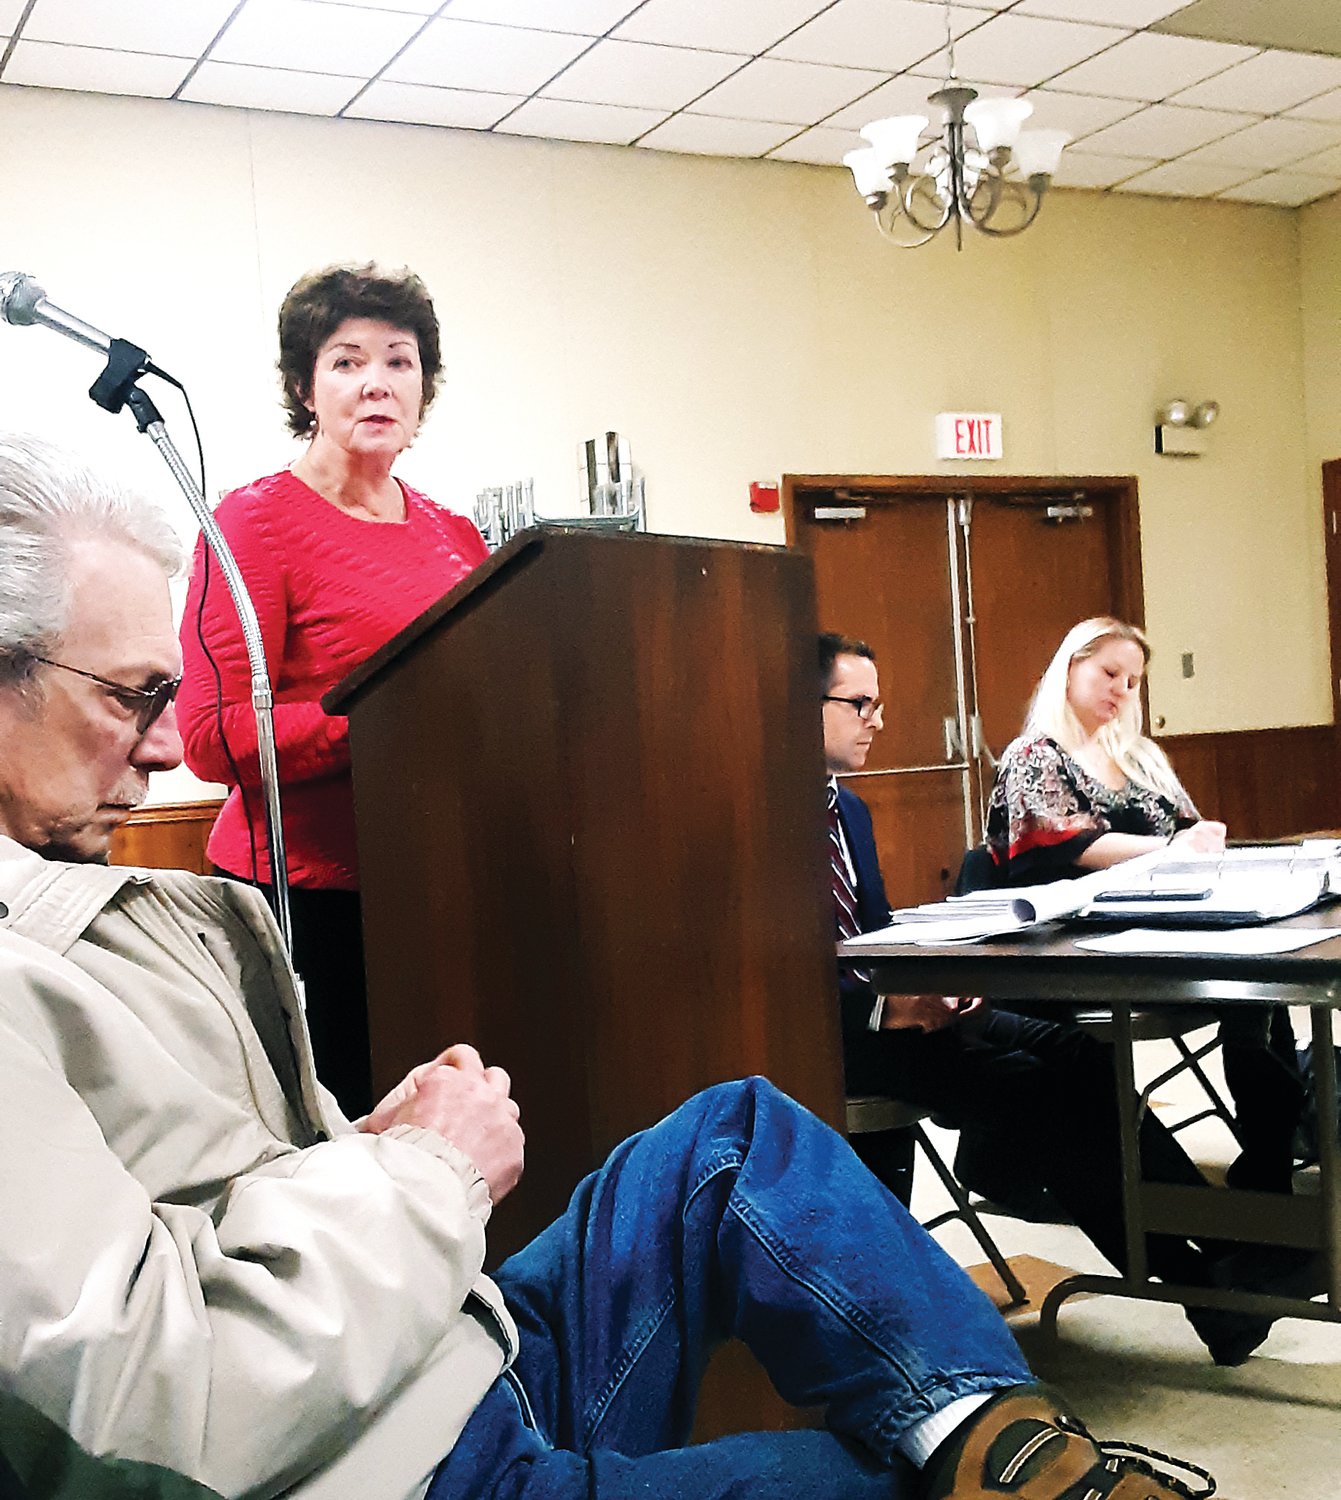 Dr. Gerrianne Burke speaks out against a proposed agribusiness Monday at the Springtown fire hall, saying it would alter the character of the quiet rural neighborhood. The next hearing is scheduled to take place March 2.